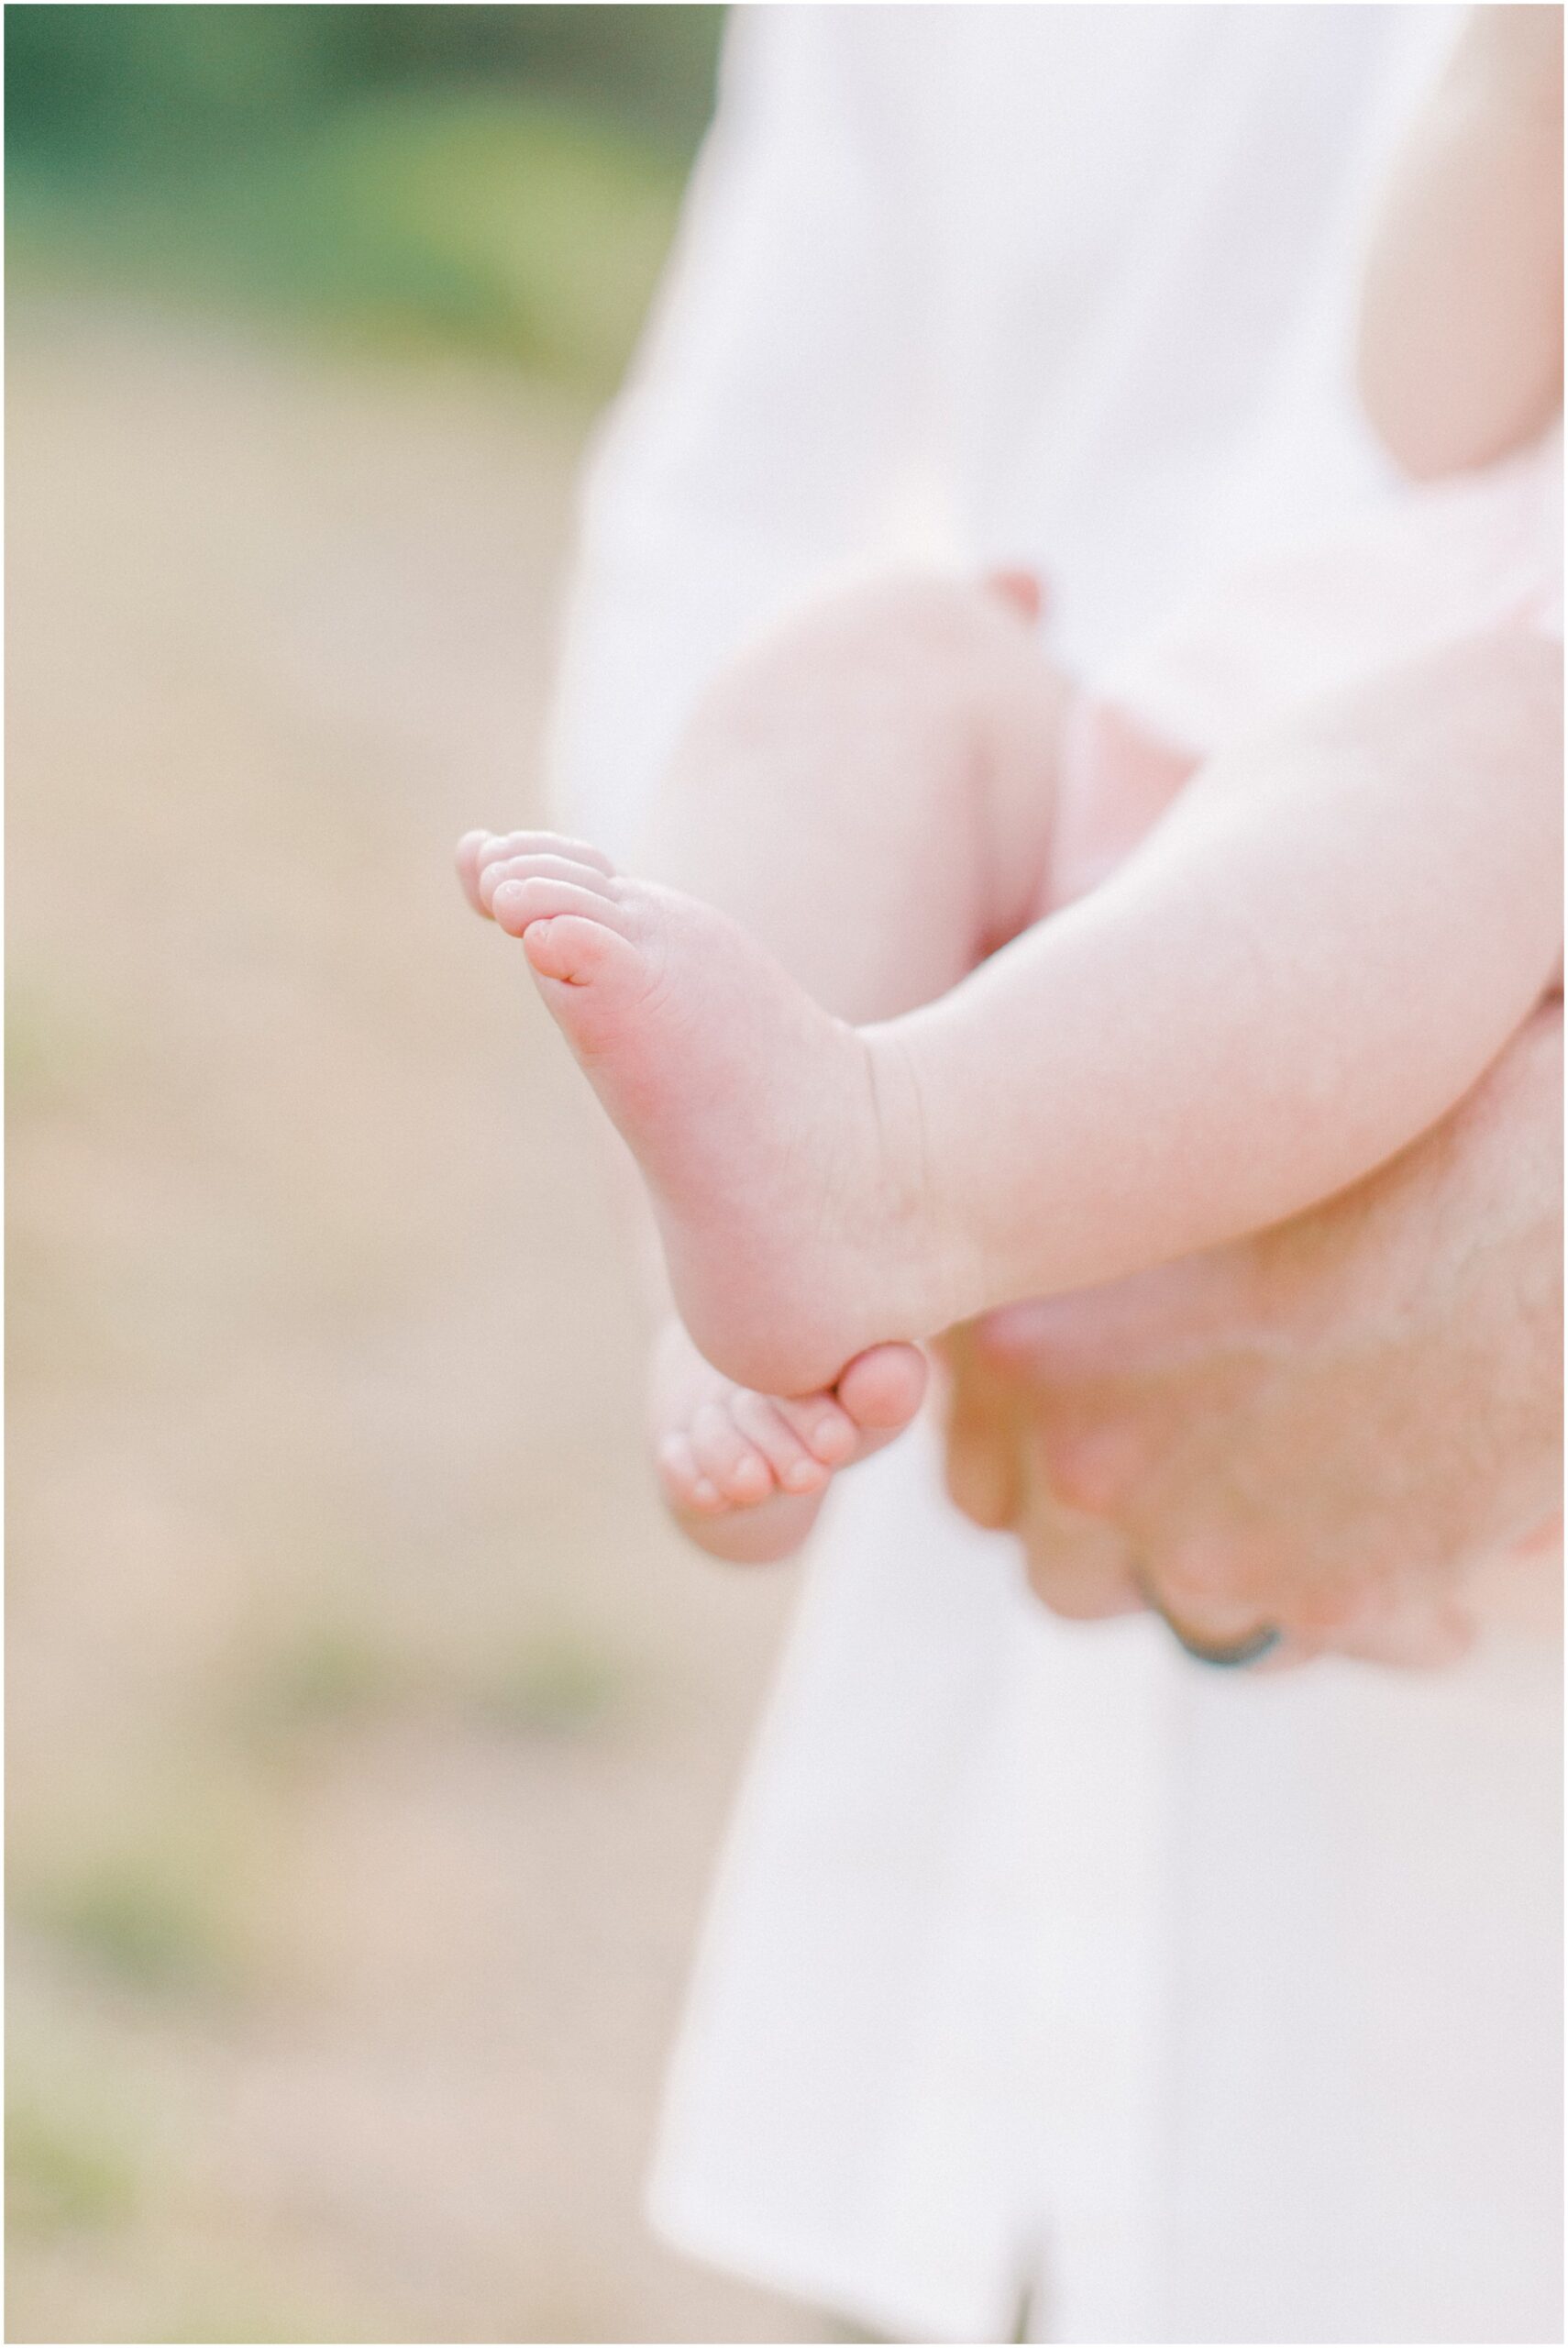 Details of baby girls little feet and toes